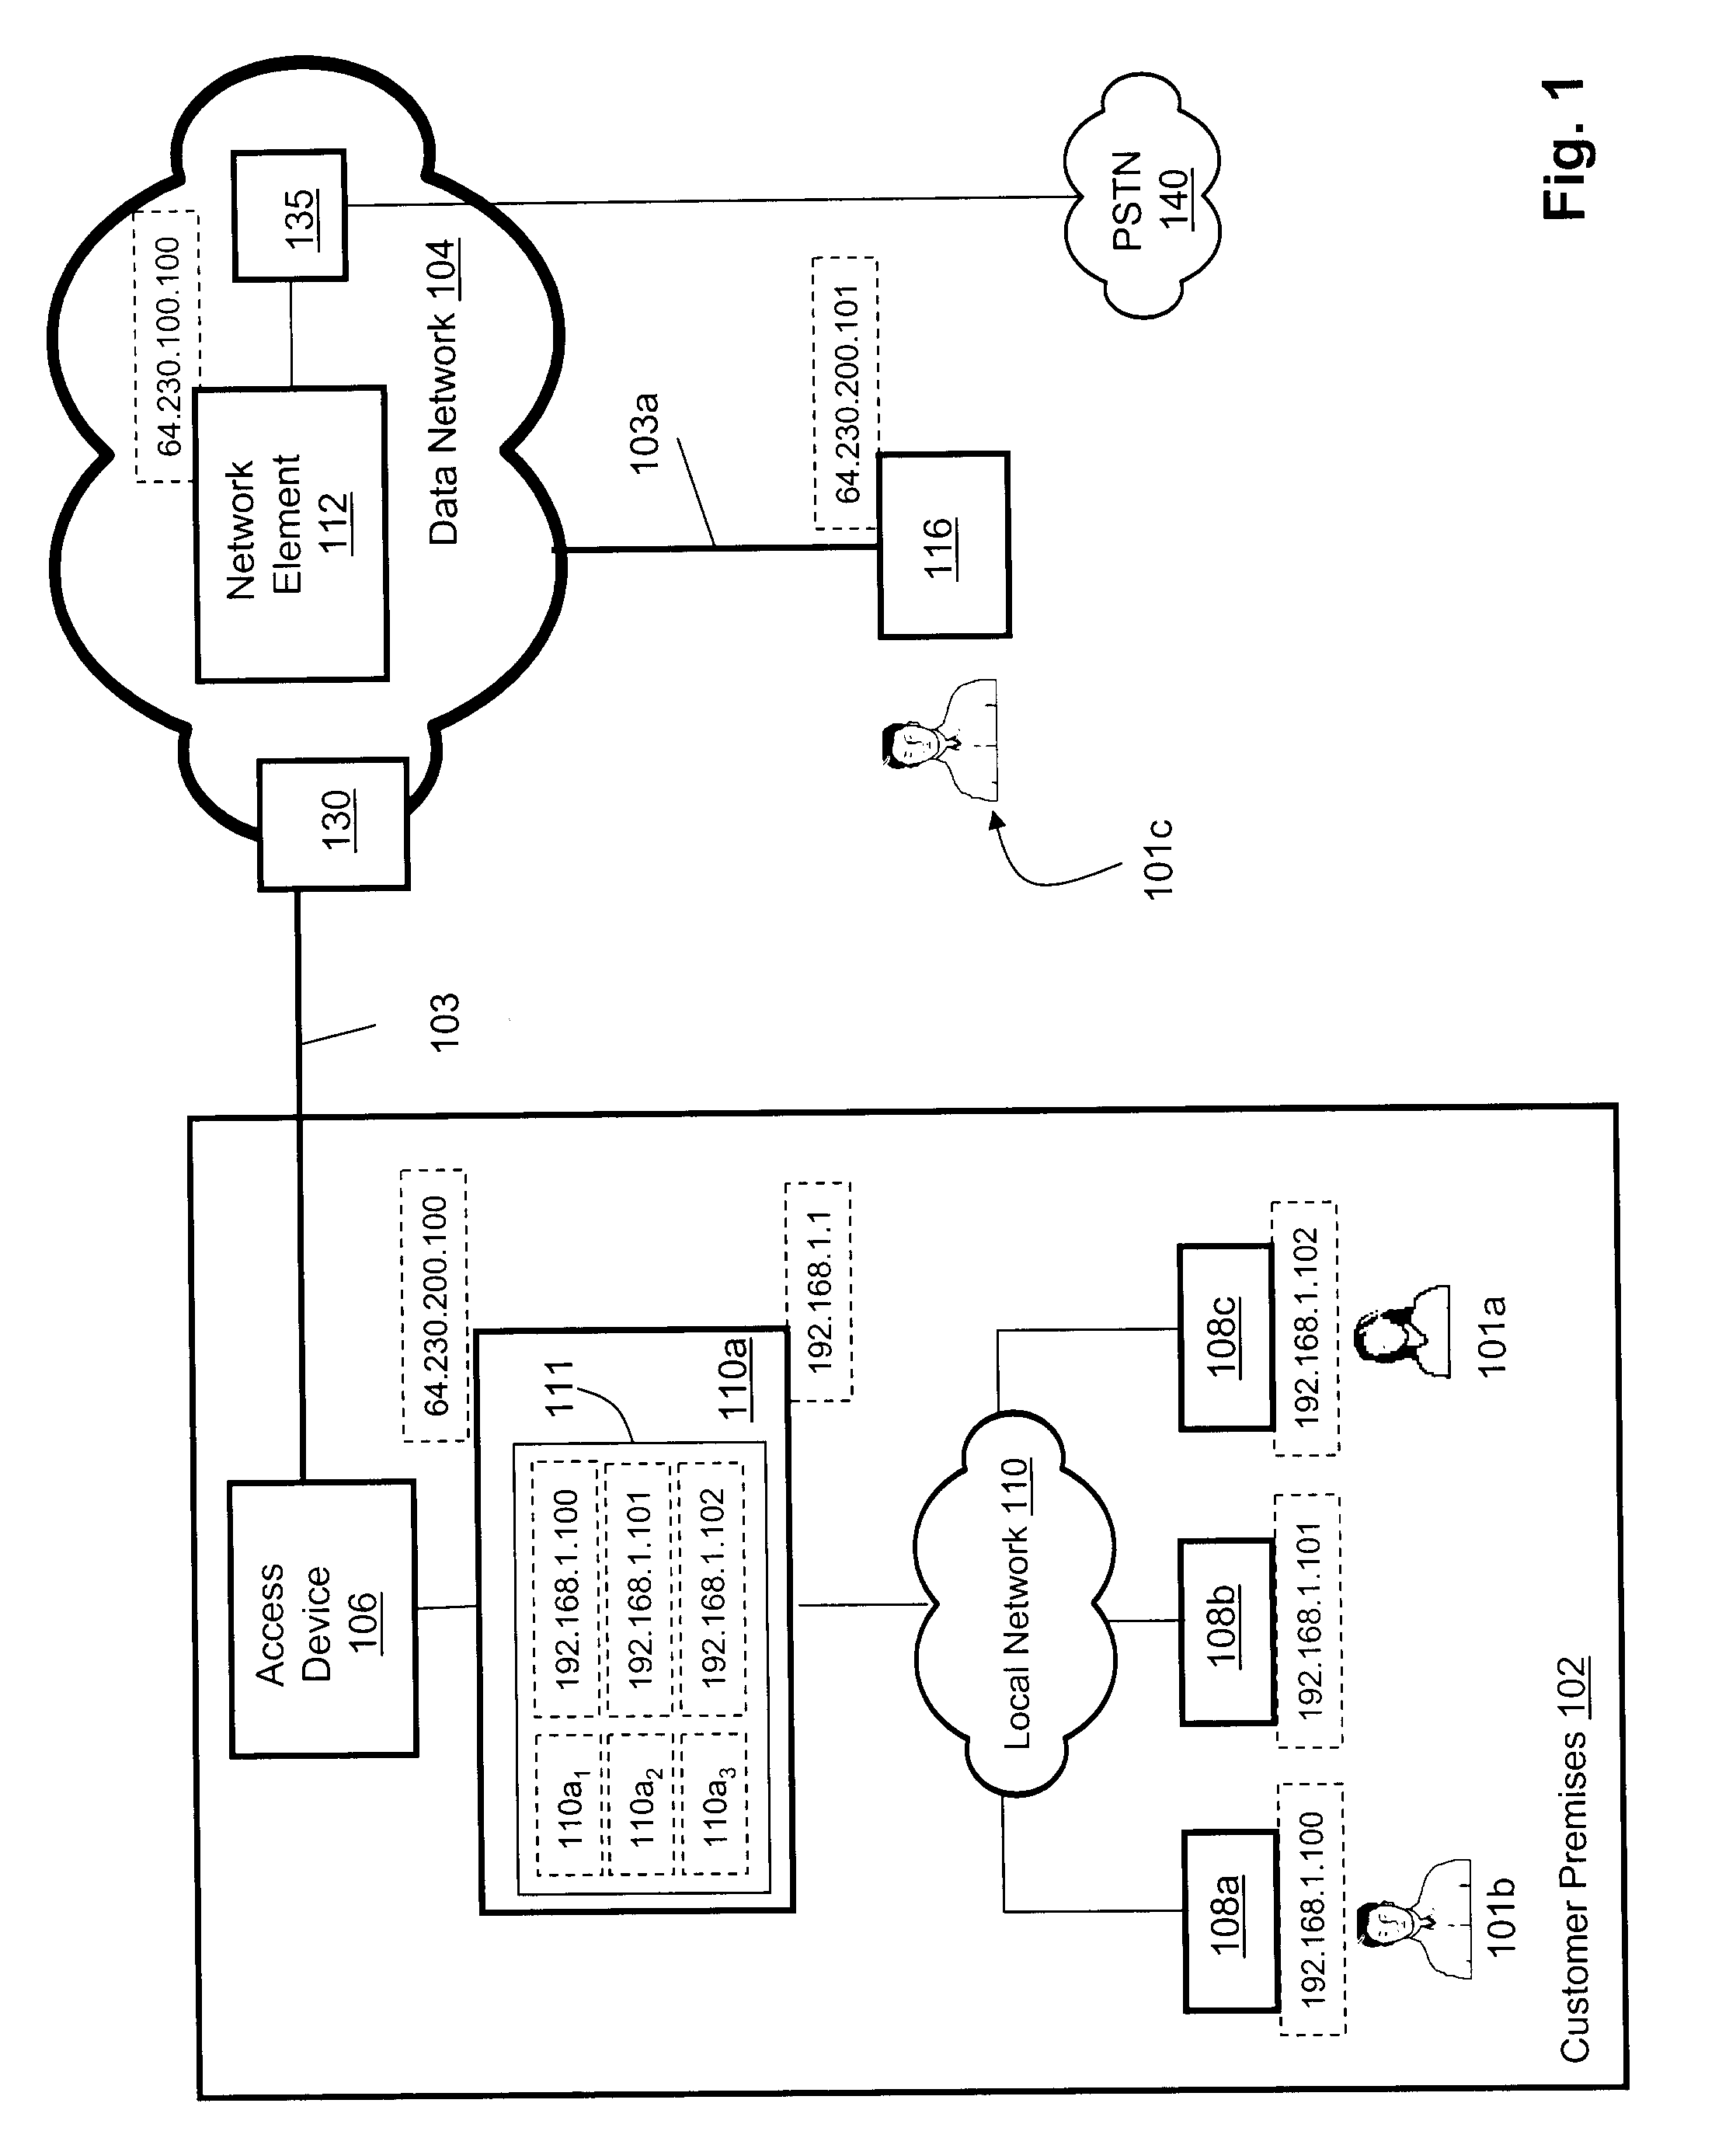 Method, system and apparatus for providing calling name identification